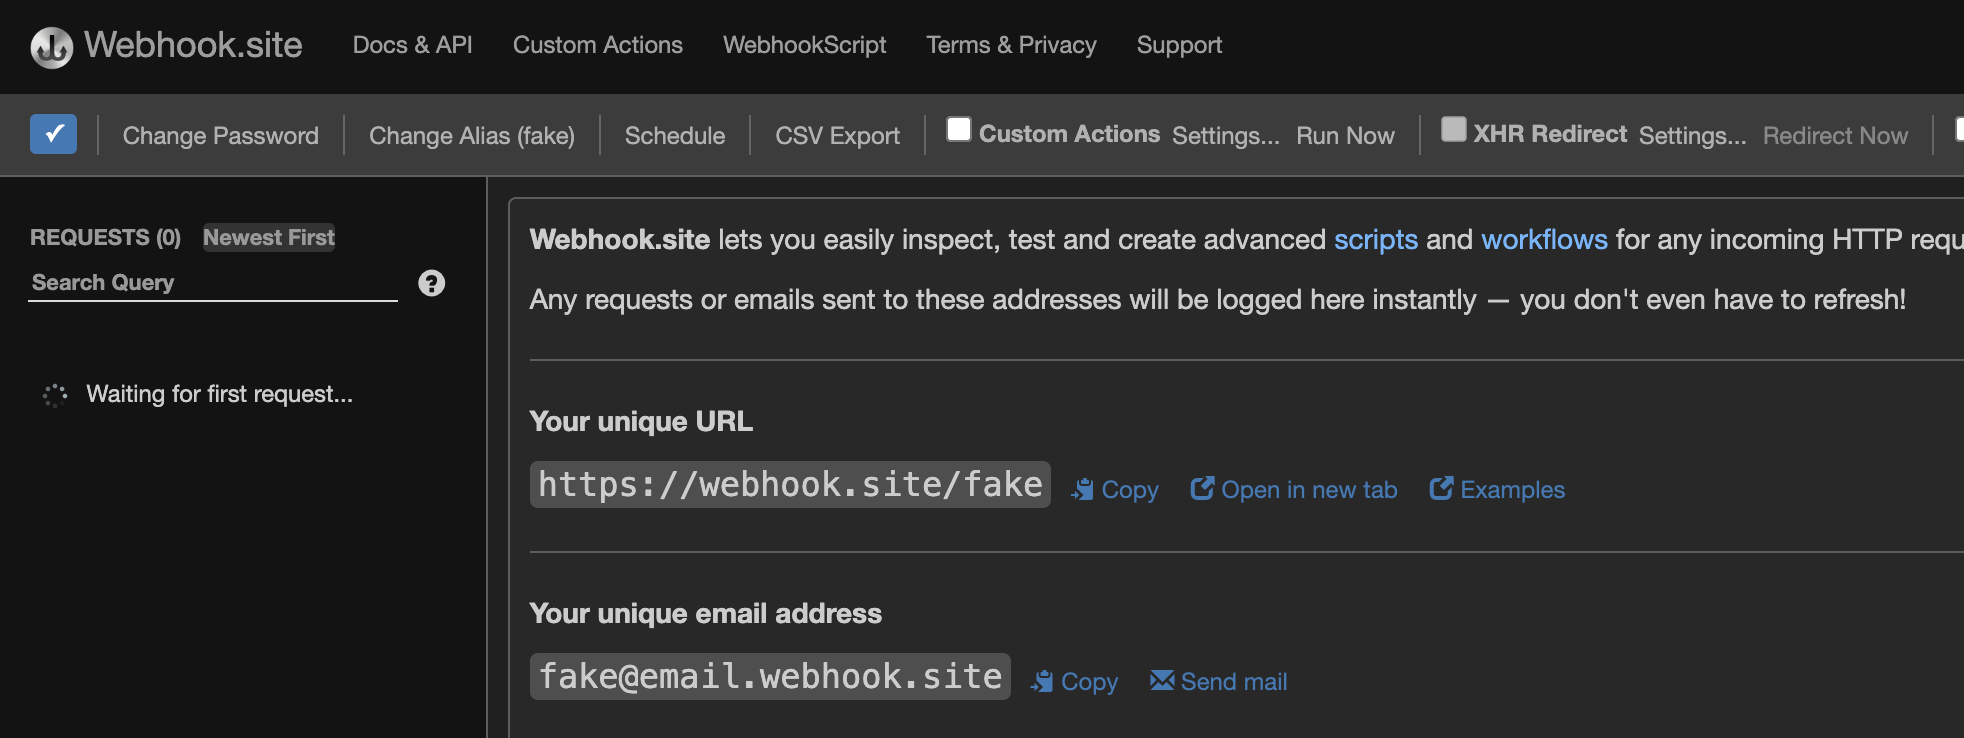 webhook.site page showing control of webhook.site/fake